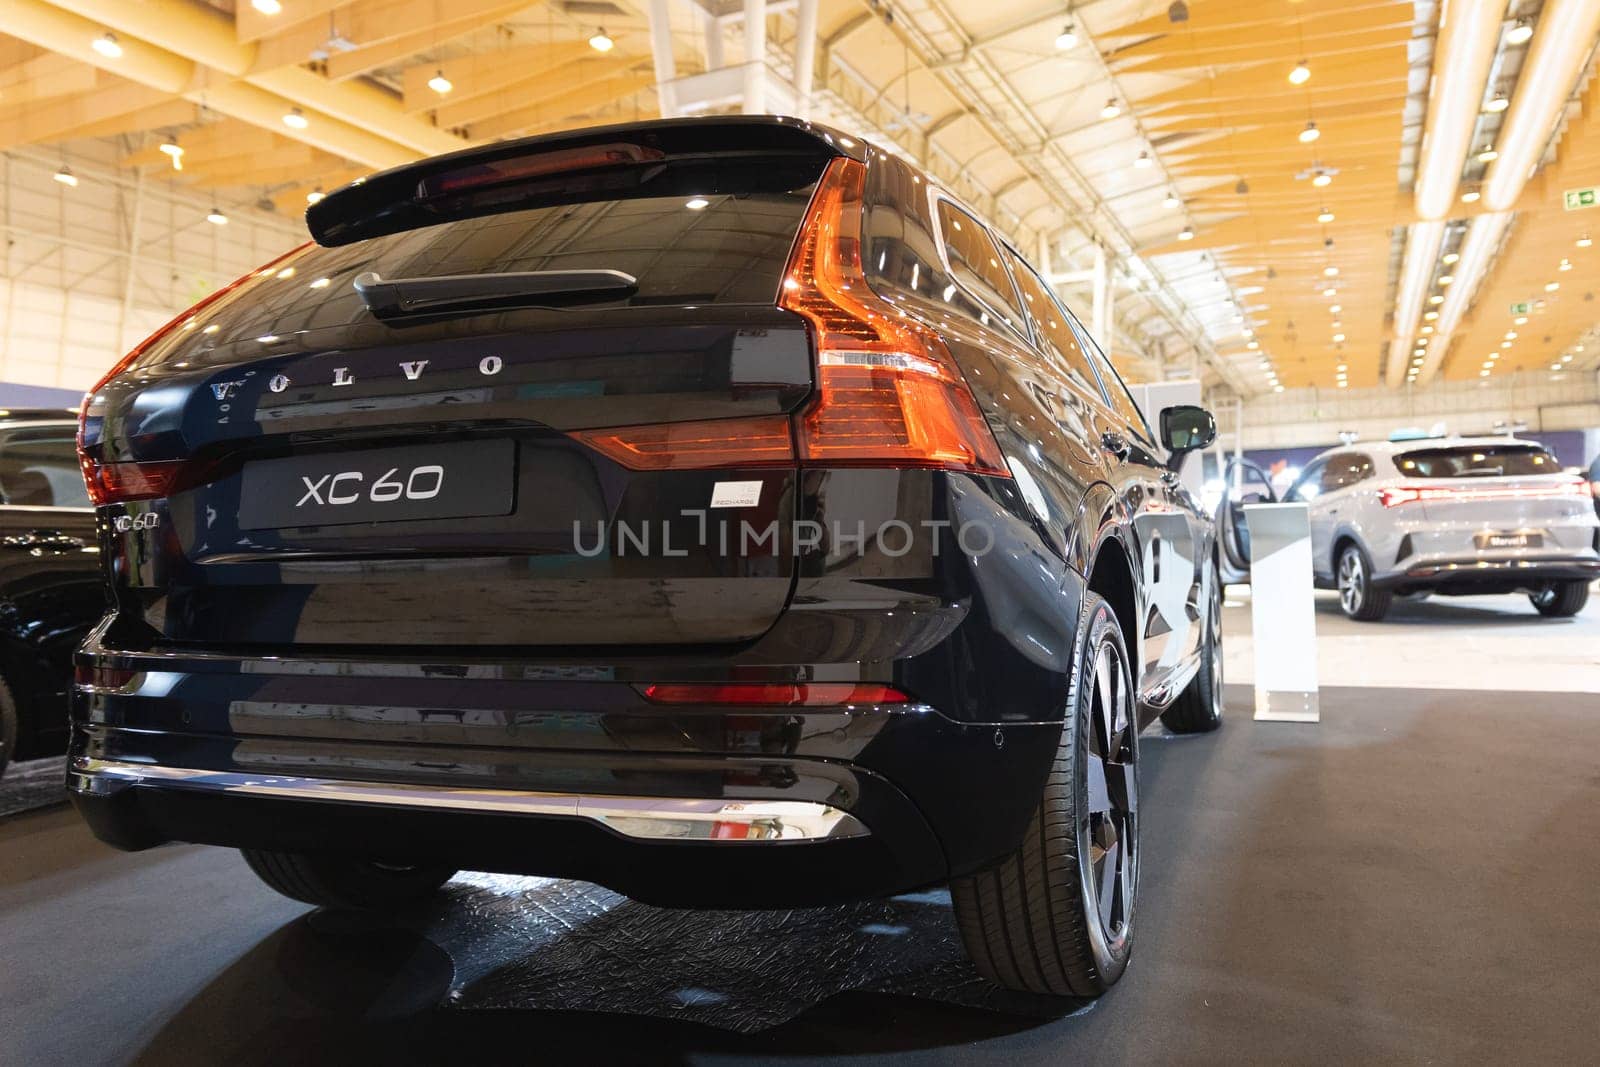 12 MAY 2023, Lisbon, Porugal, Electric car Show in International Fairy of Lisbon - A black volvo car is on display in a showroom